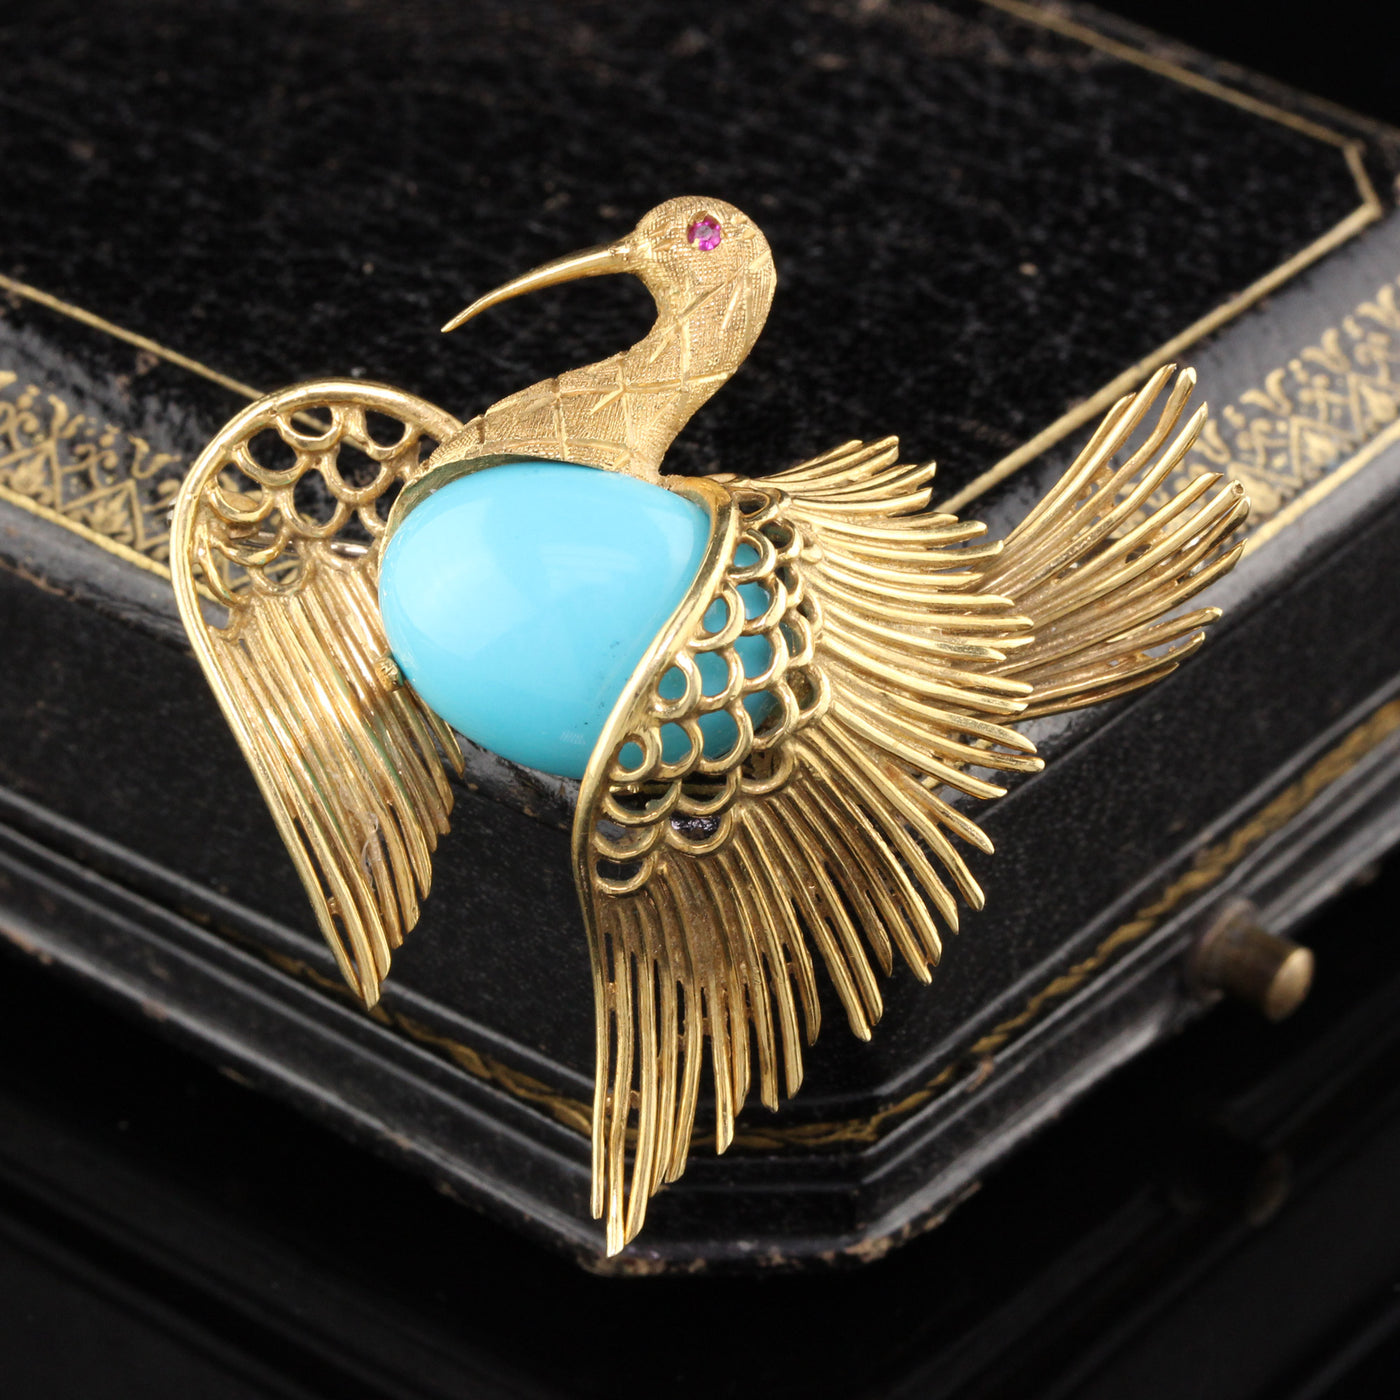 Vintage Estate 18K Yellow Gold & Turquoise Swan Brooch